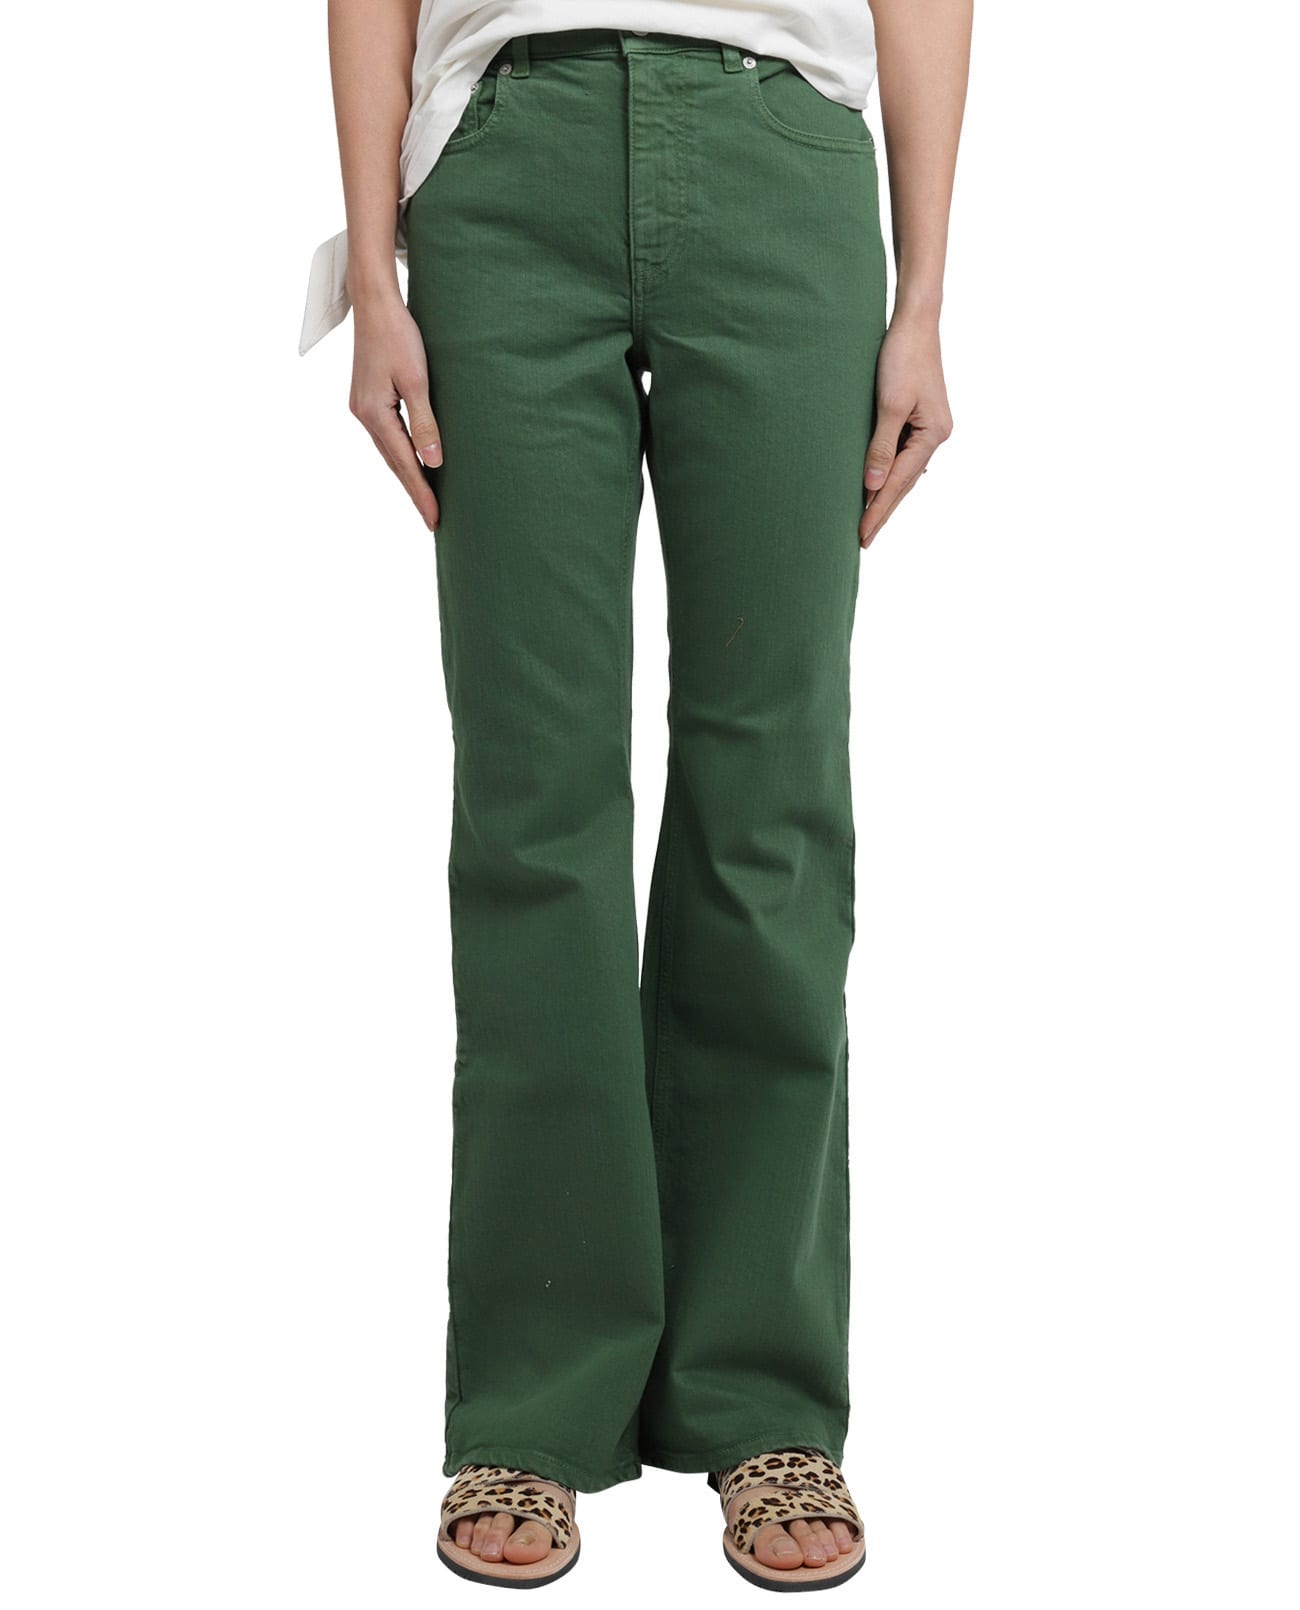 JW ANDERSON JW ANDERSON GREEN BOOTCUT JEANS